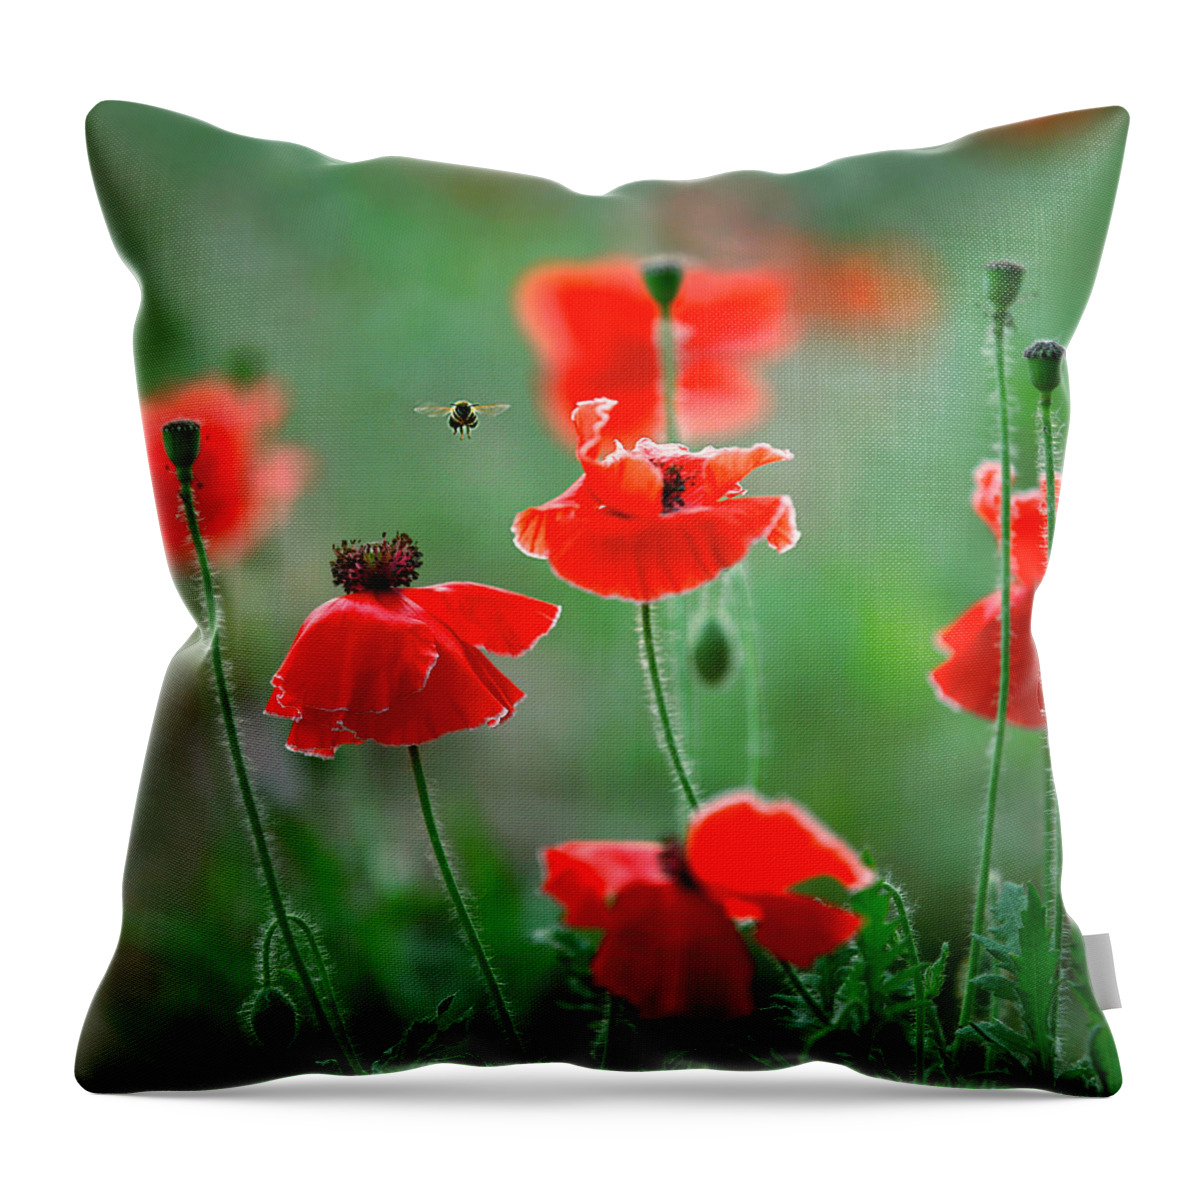 Scenics Throw Pillow featuring the photograph Close-up Of Honeybee by View Stock